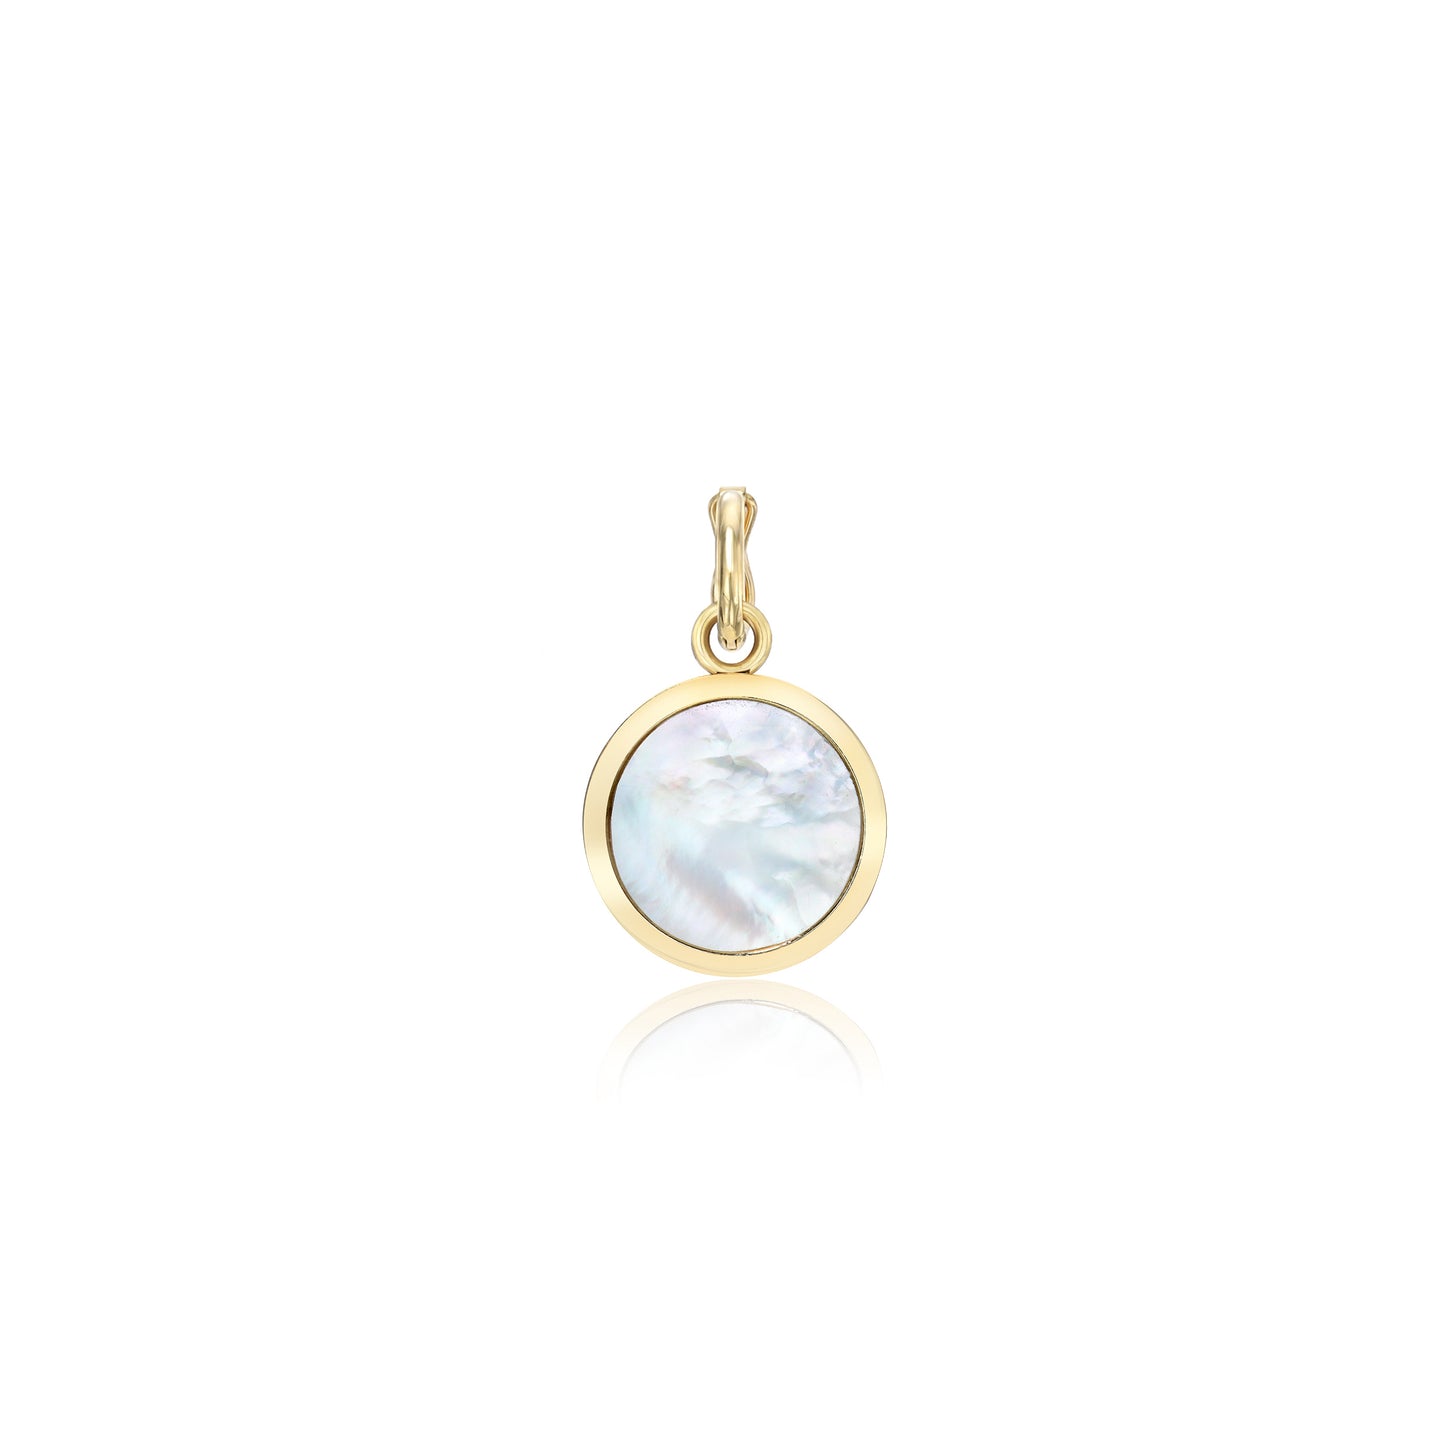 Petite Mother of Pearl Charm